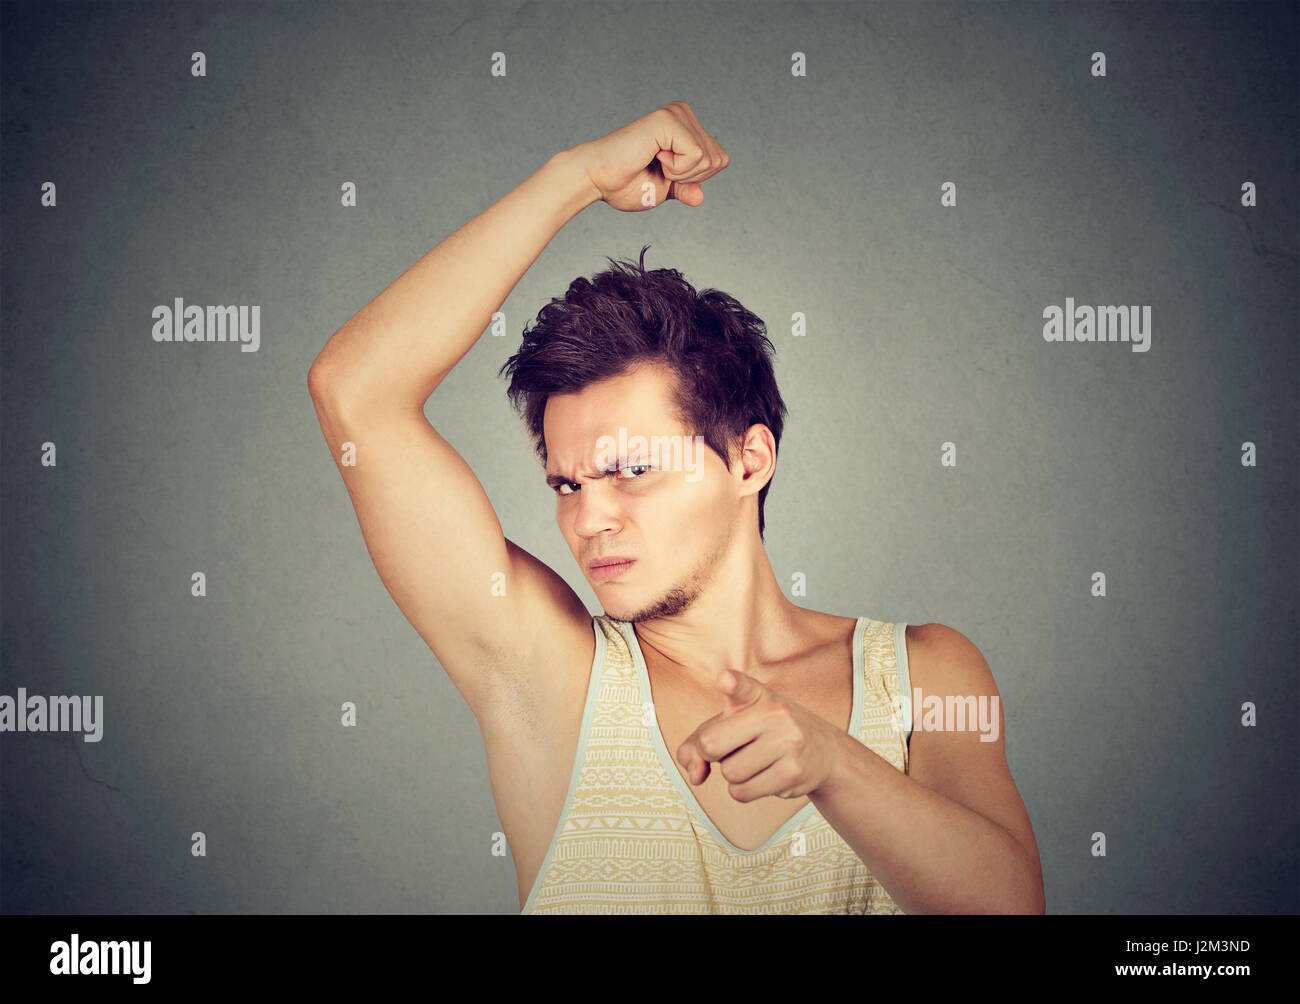 Closeup portrait of young man, smelling, sniffing his armpit, something stinks, bad, foul odor, pointing finger at camera isolated on gray background. Stock Photo